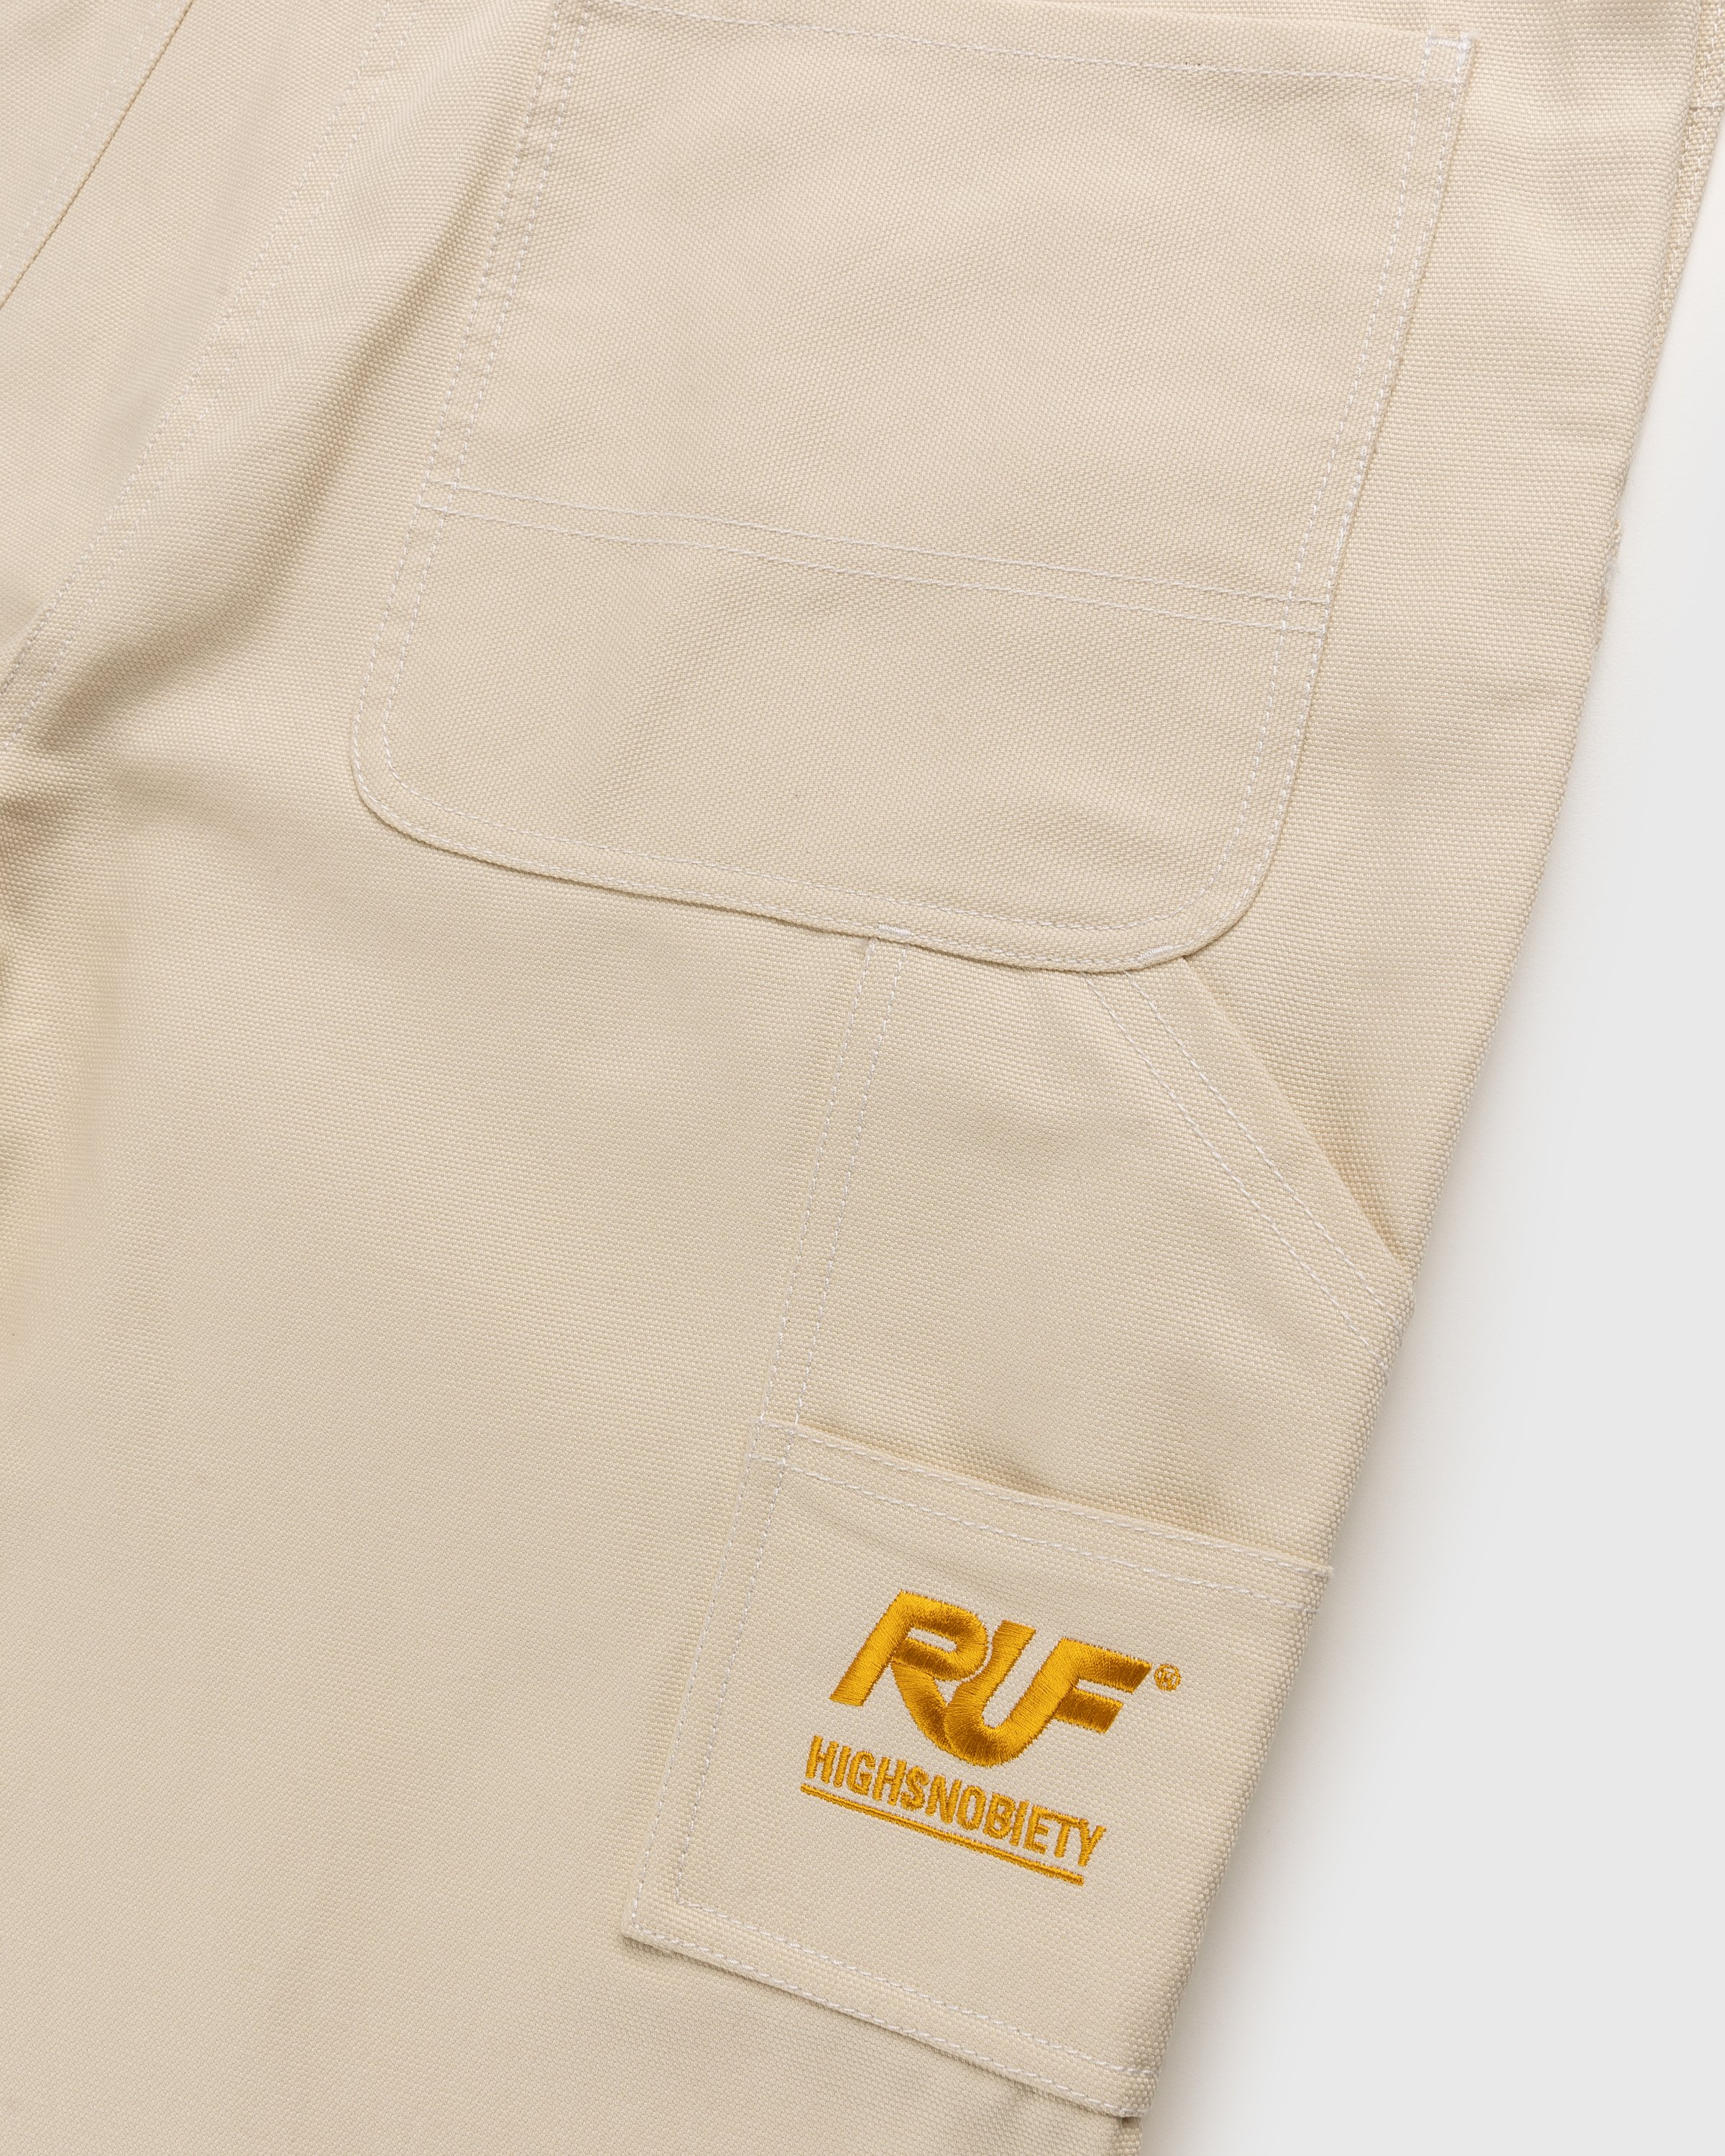 RUF x Highsnobiety - Cotton Overalls Natural - Clothing - Beige - Image 4